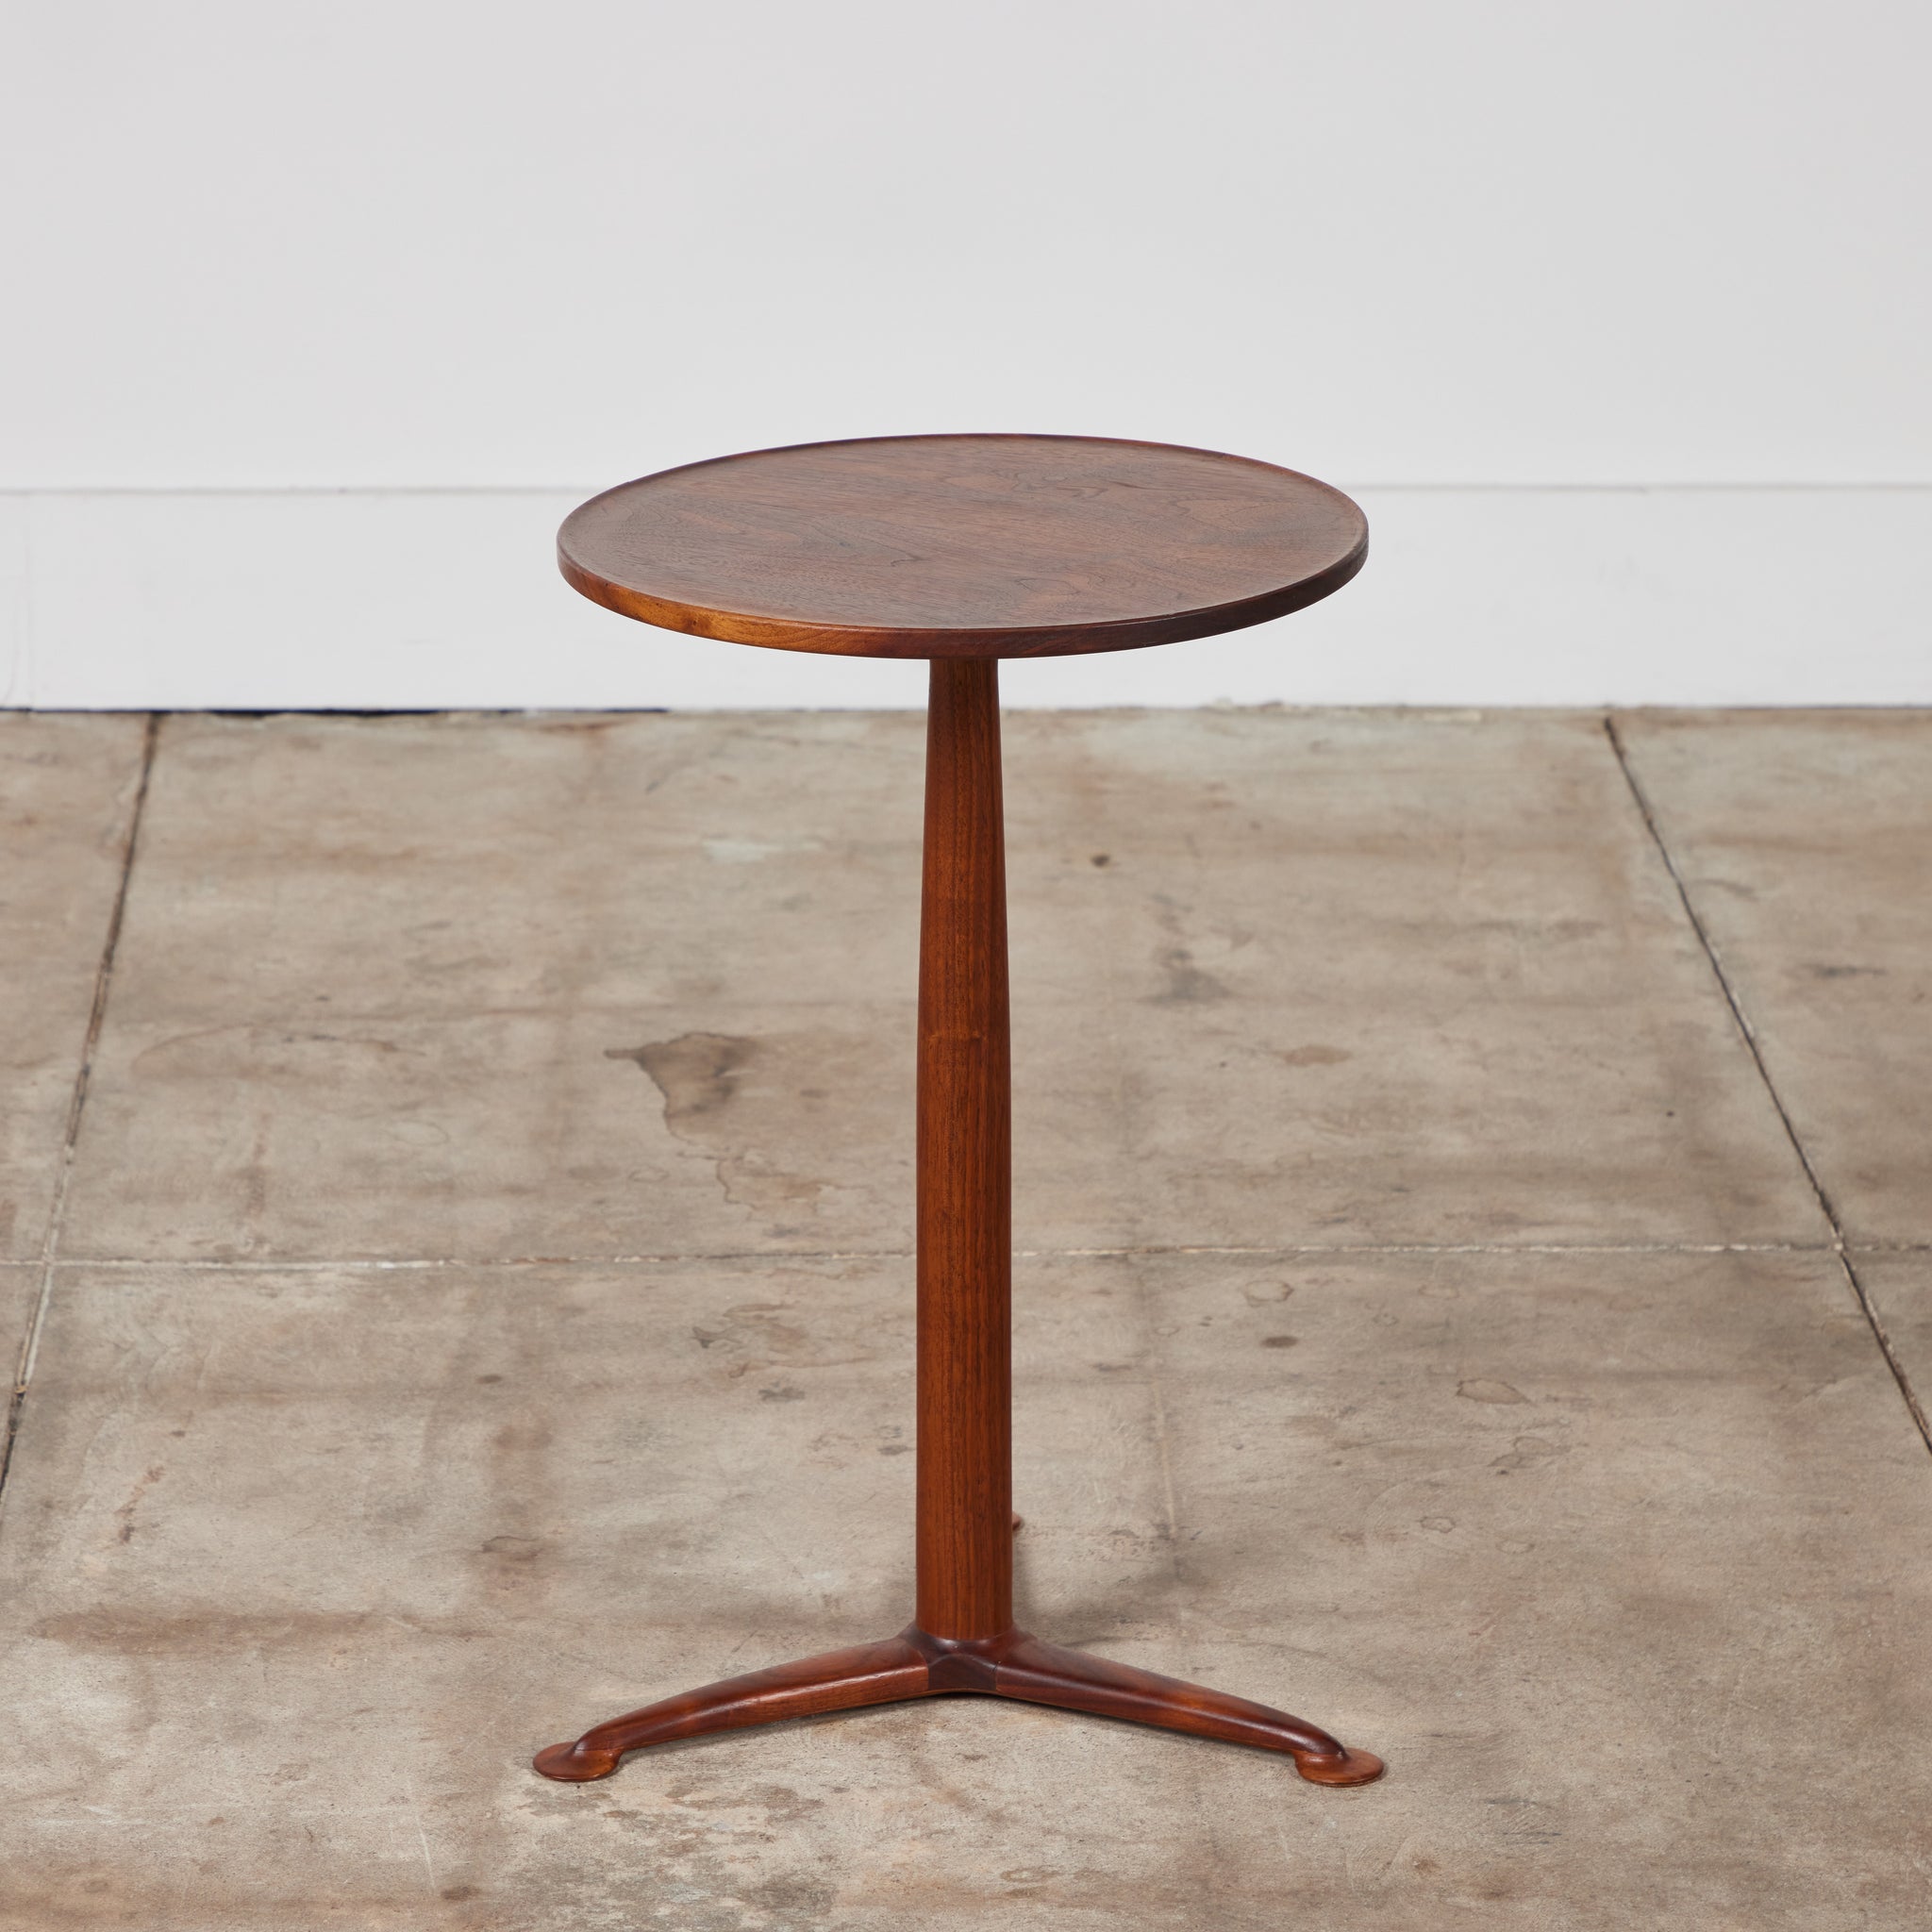 ON HOLD ** Studio Craft Round Tripod Side Table